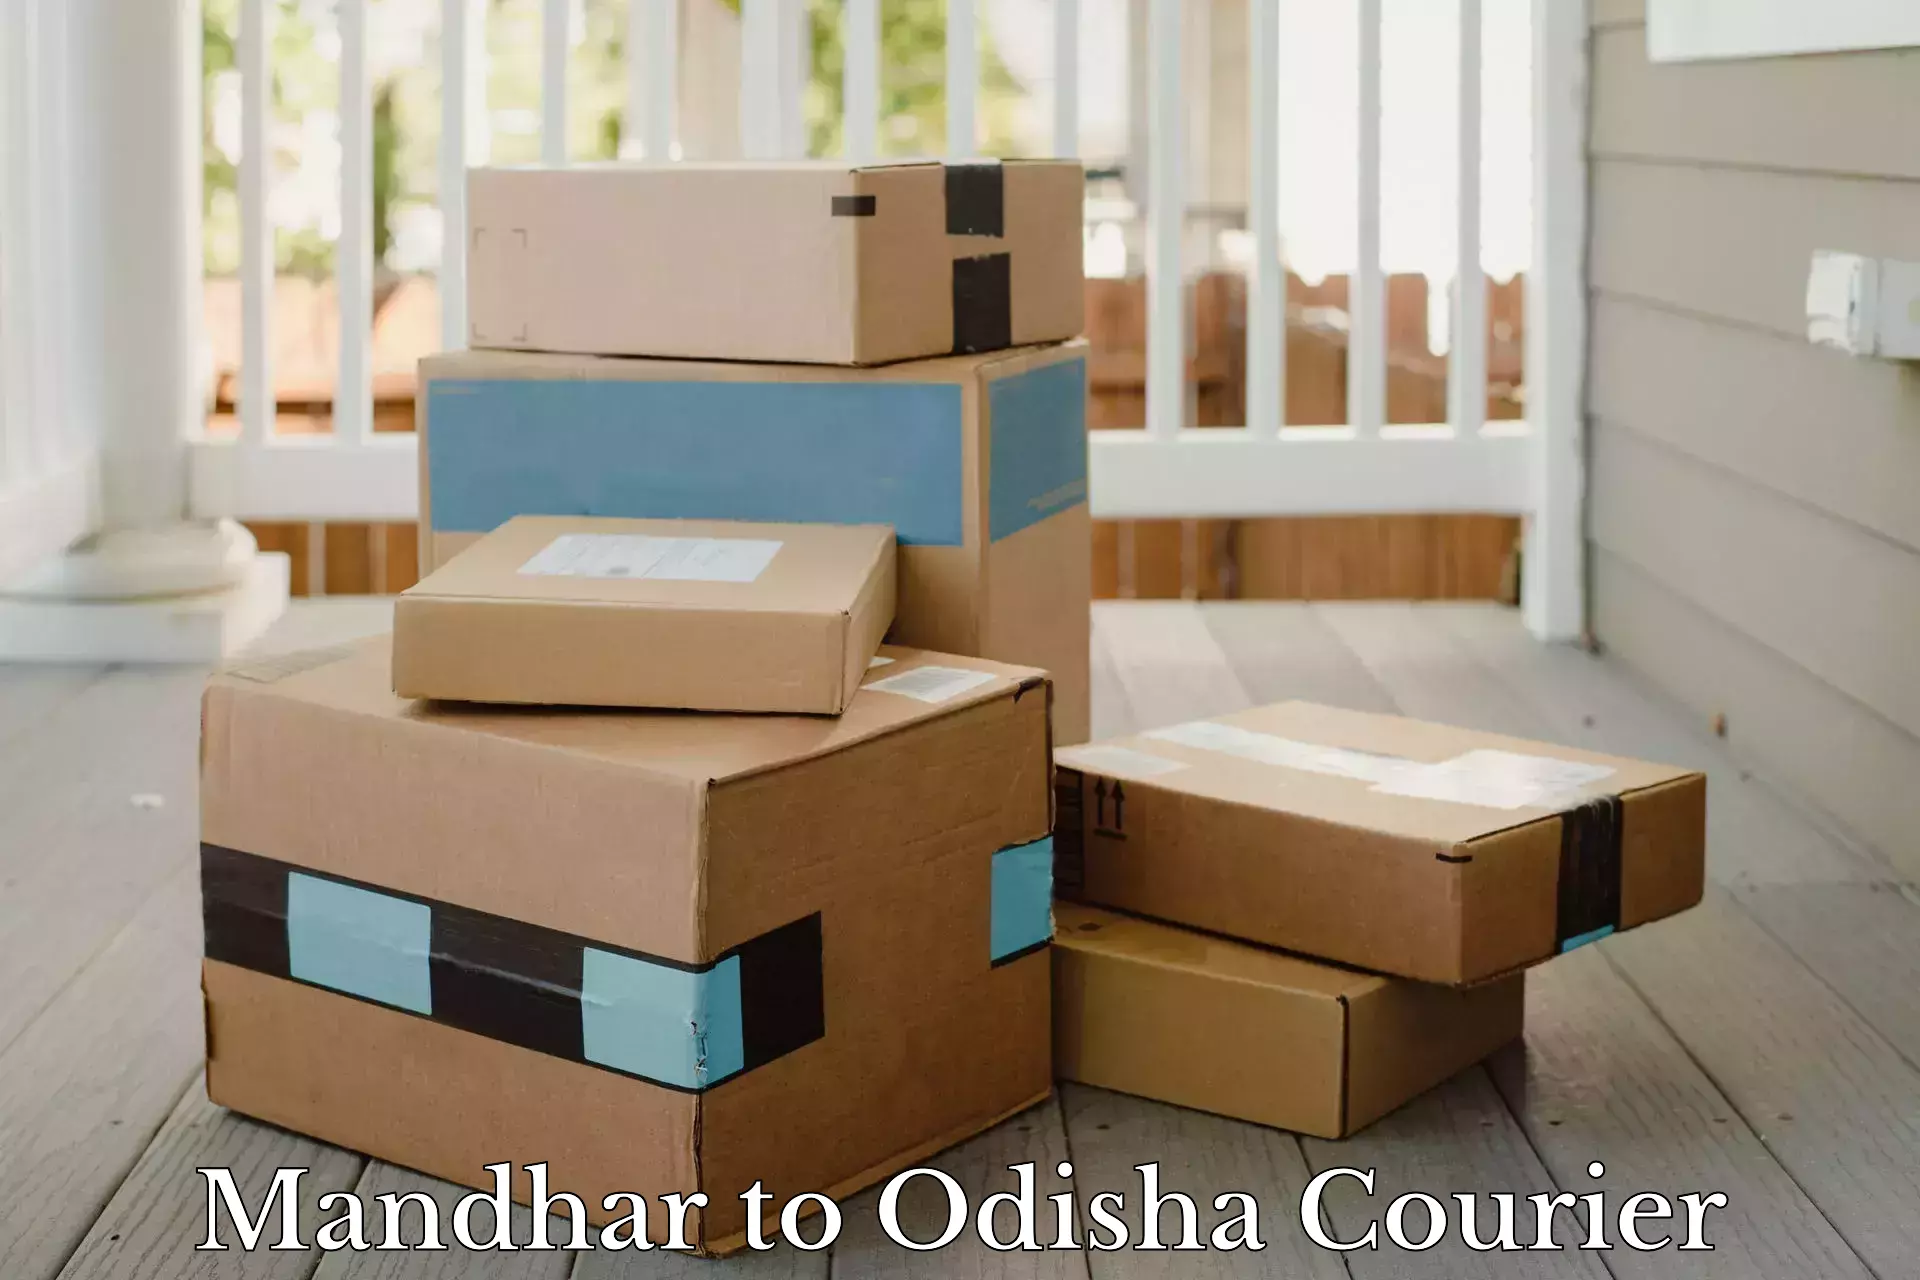 Multi-service courier options in Mandhar to Sohela